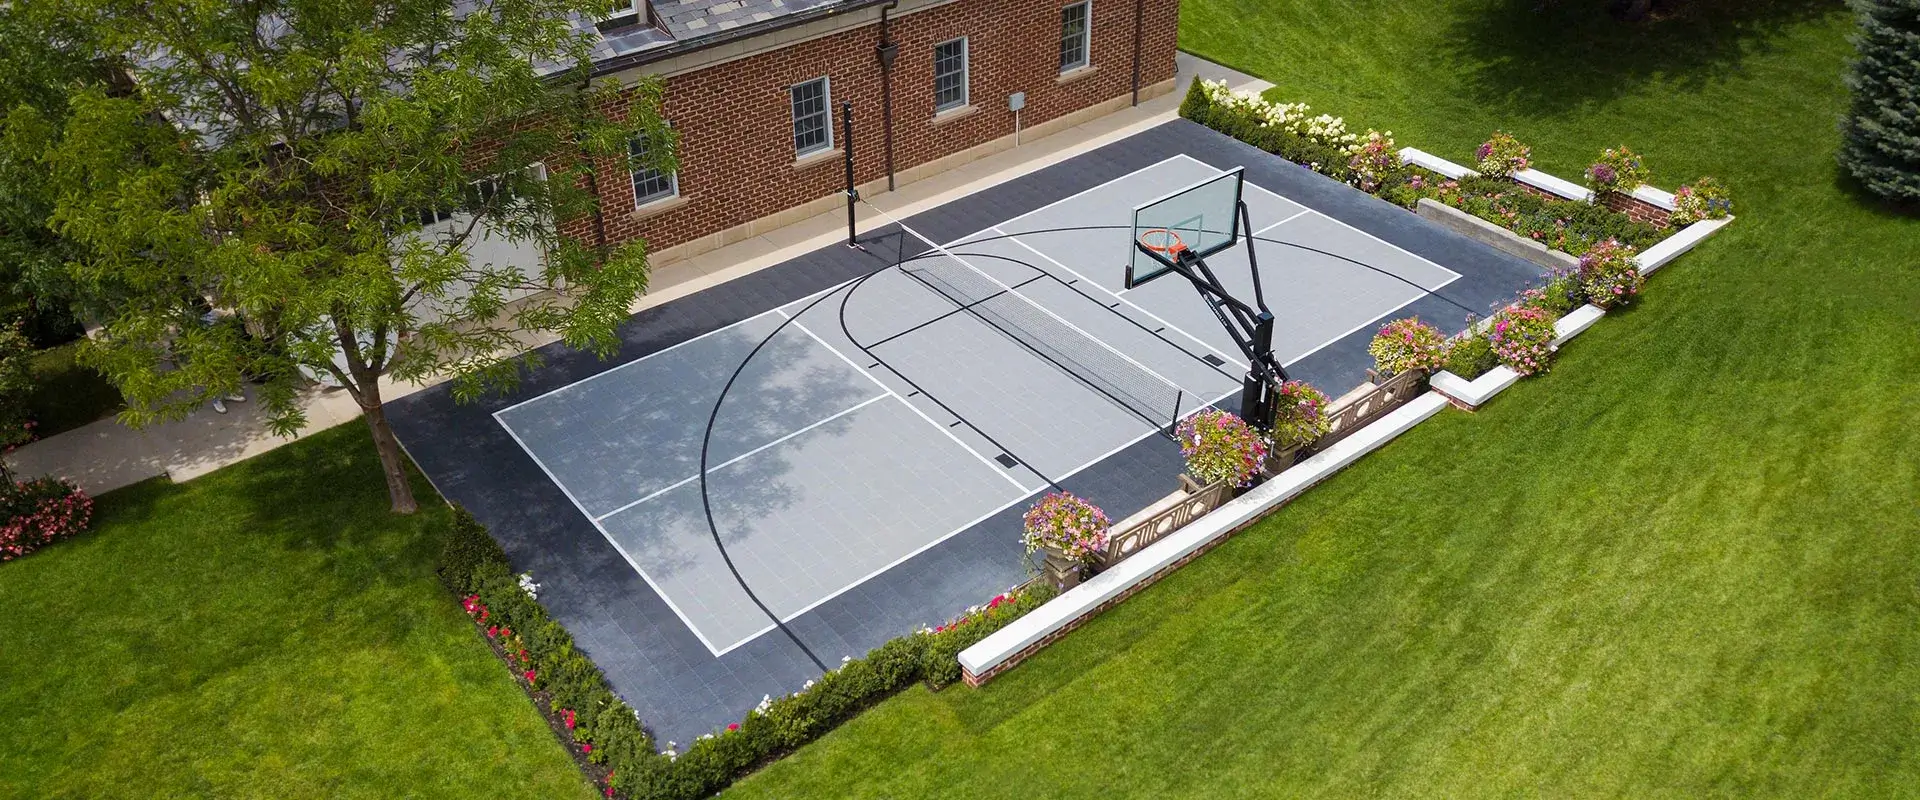 Drone view of a court.